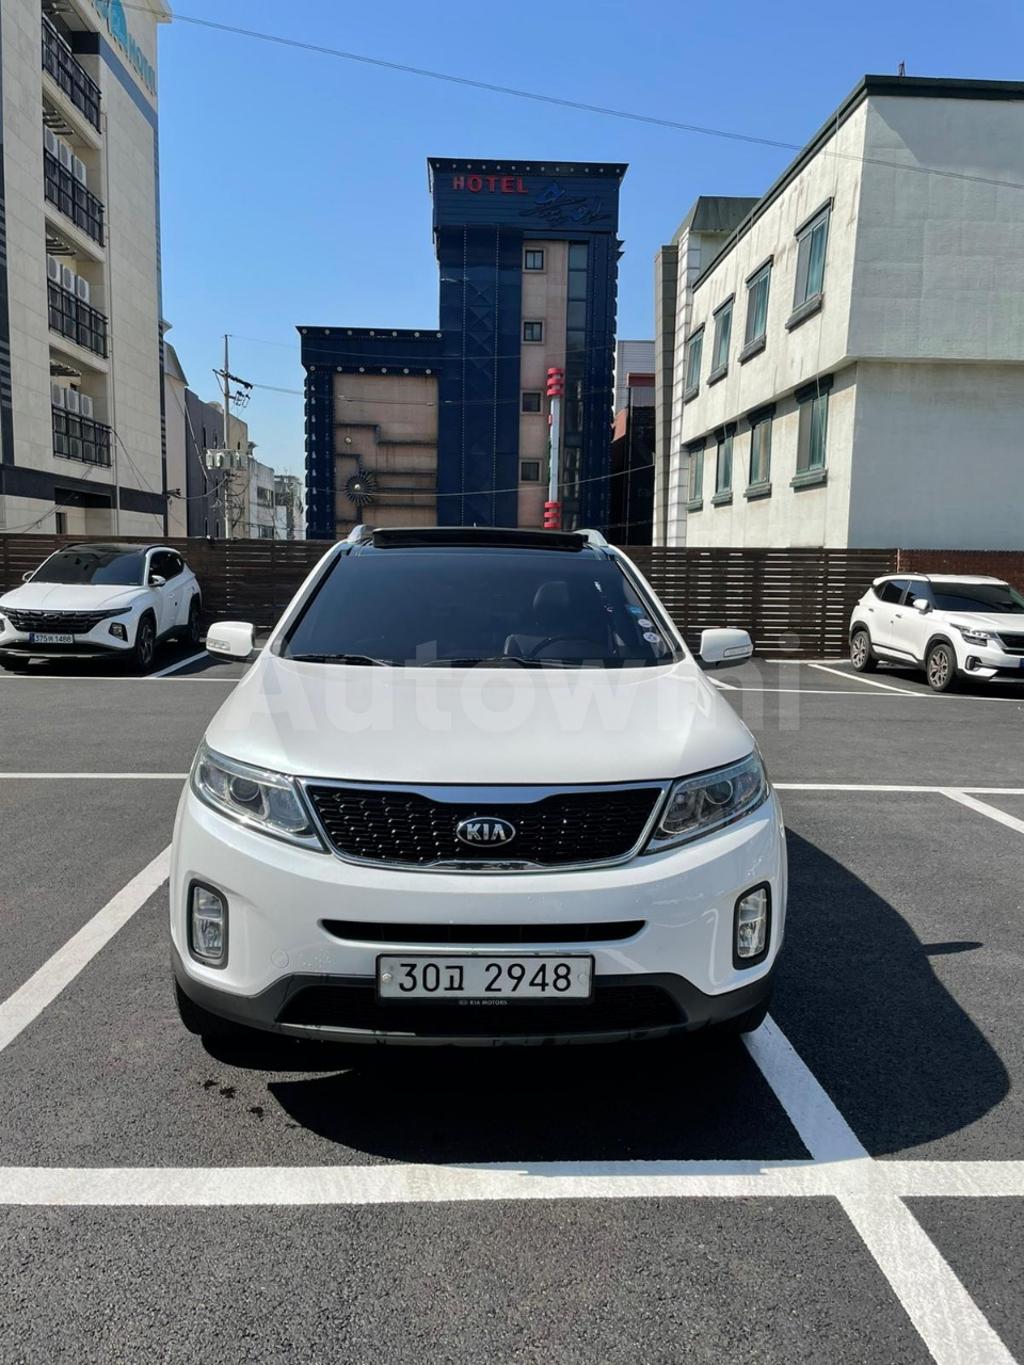 KNAKW815BEA479226   ?RE-CARVED VIN NUMBER  BUYERS NEED TO CHECK IF RE-CARVED VIN NUMBERS ARE ALLOWED IN THEIR COUNTRY TO AVOID CUSTOMS ISSUES BEFORE BOOKING. 2014 KIA  SORENTO R TLX LIMITED-0